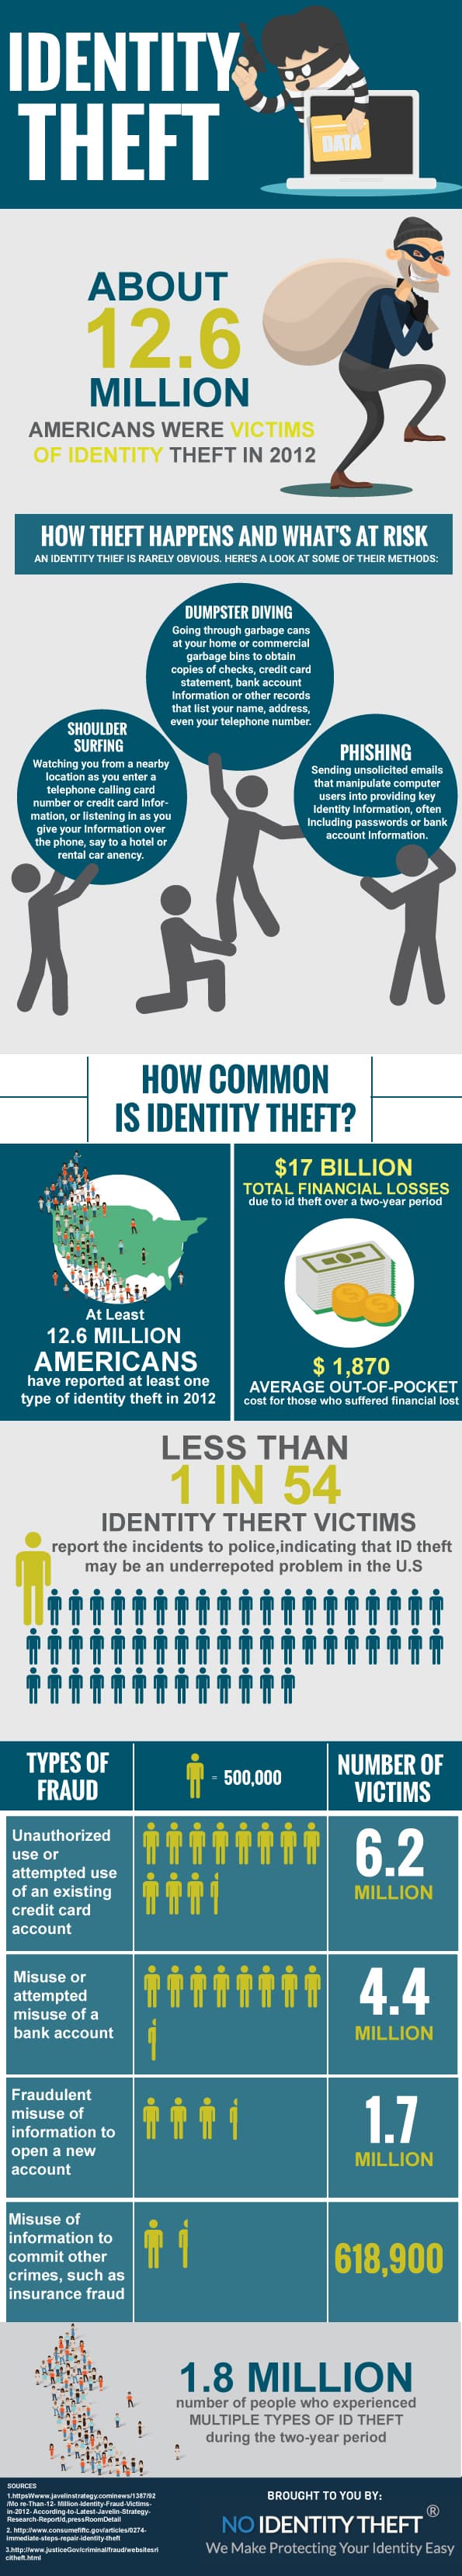 Facts about identity theft